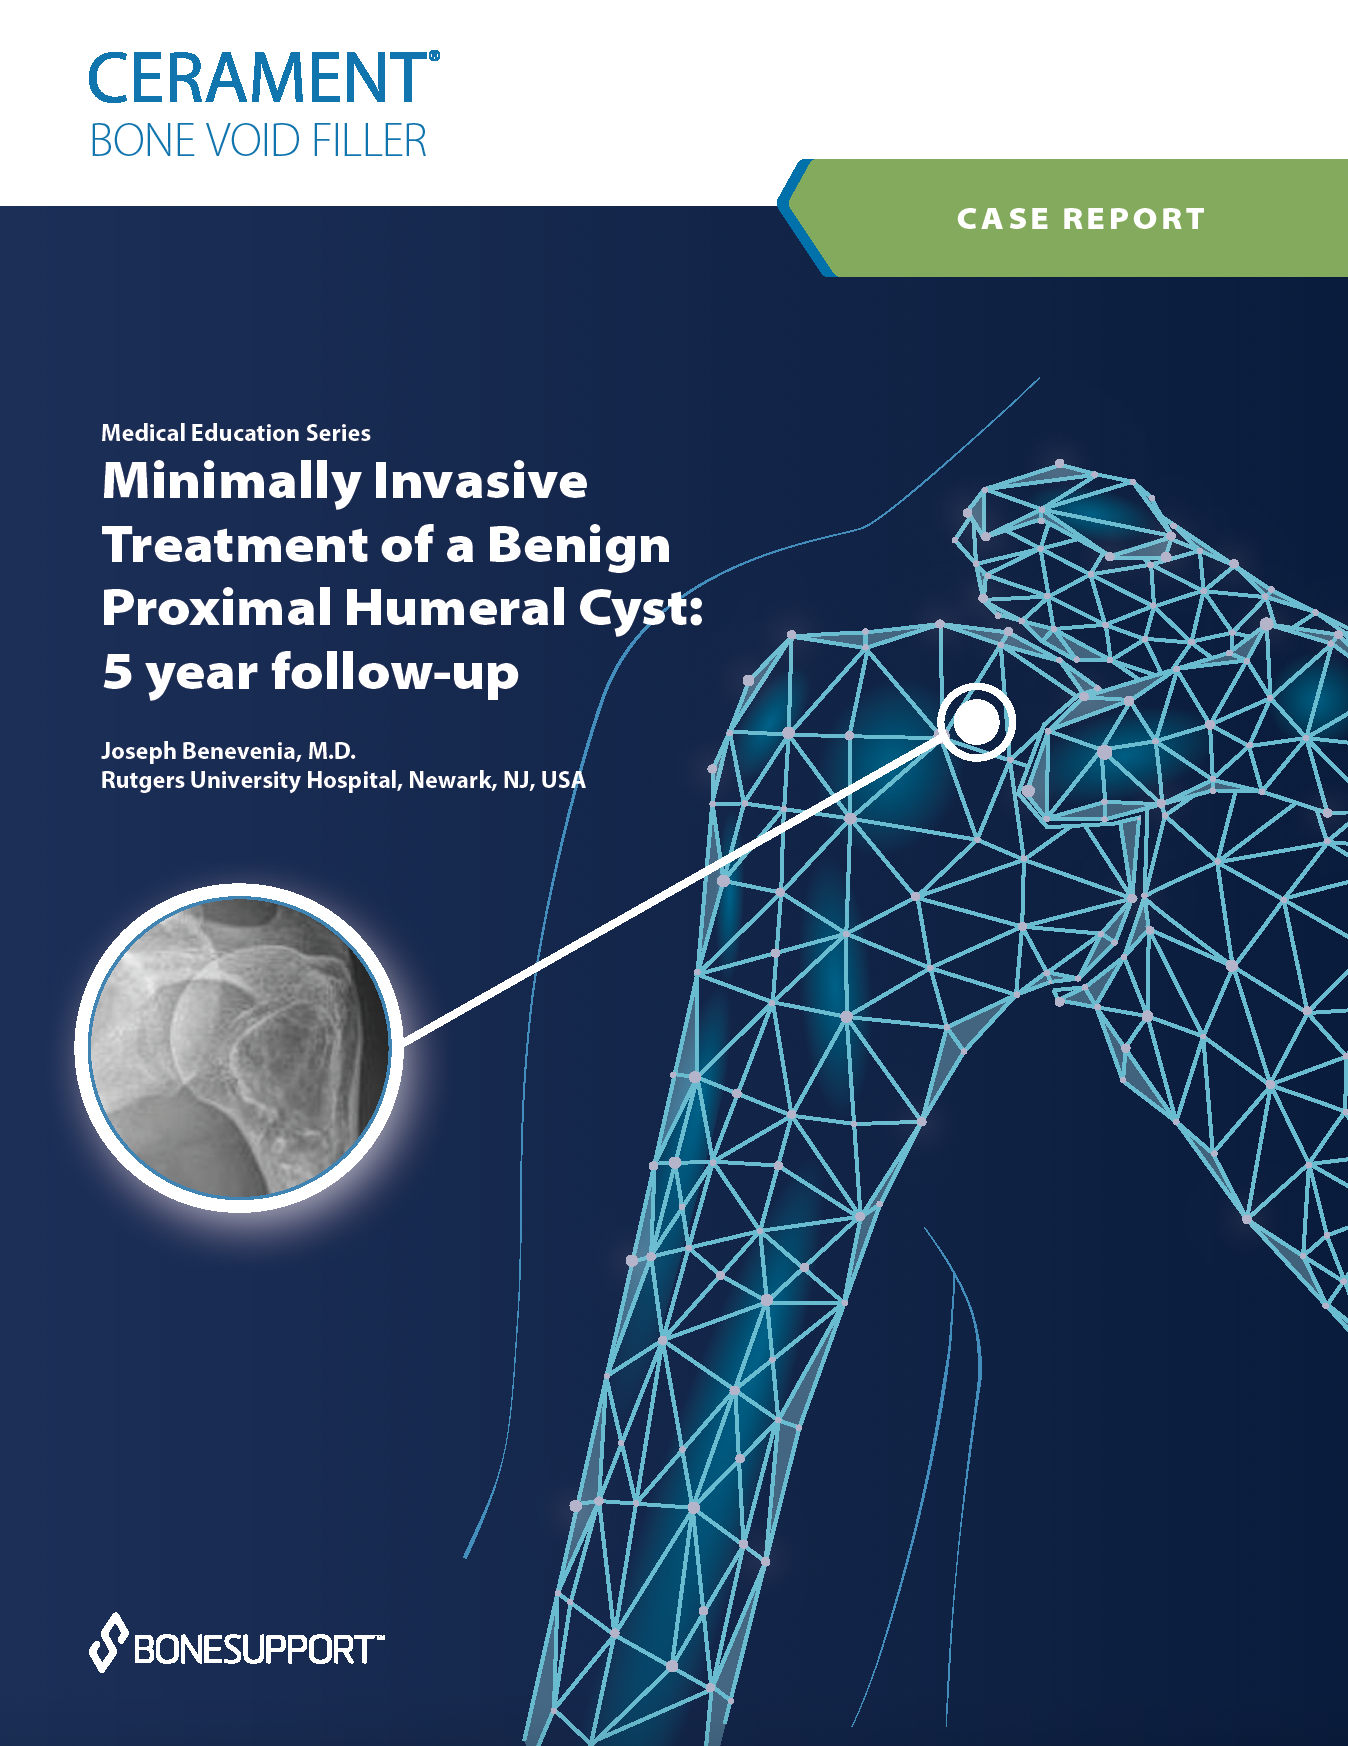 Benevenia Minimally Invasive Treatment of a Benign Proximal Humeral Cyst with CERAMENT BONE VOID FILLER: 5 year follow-up